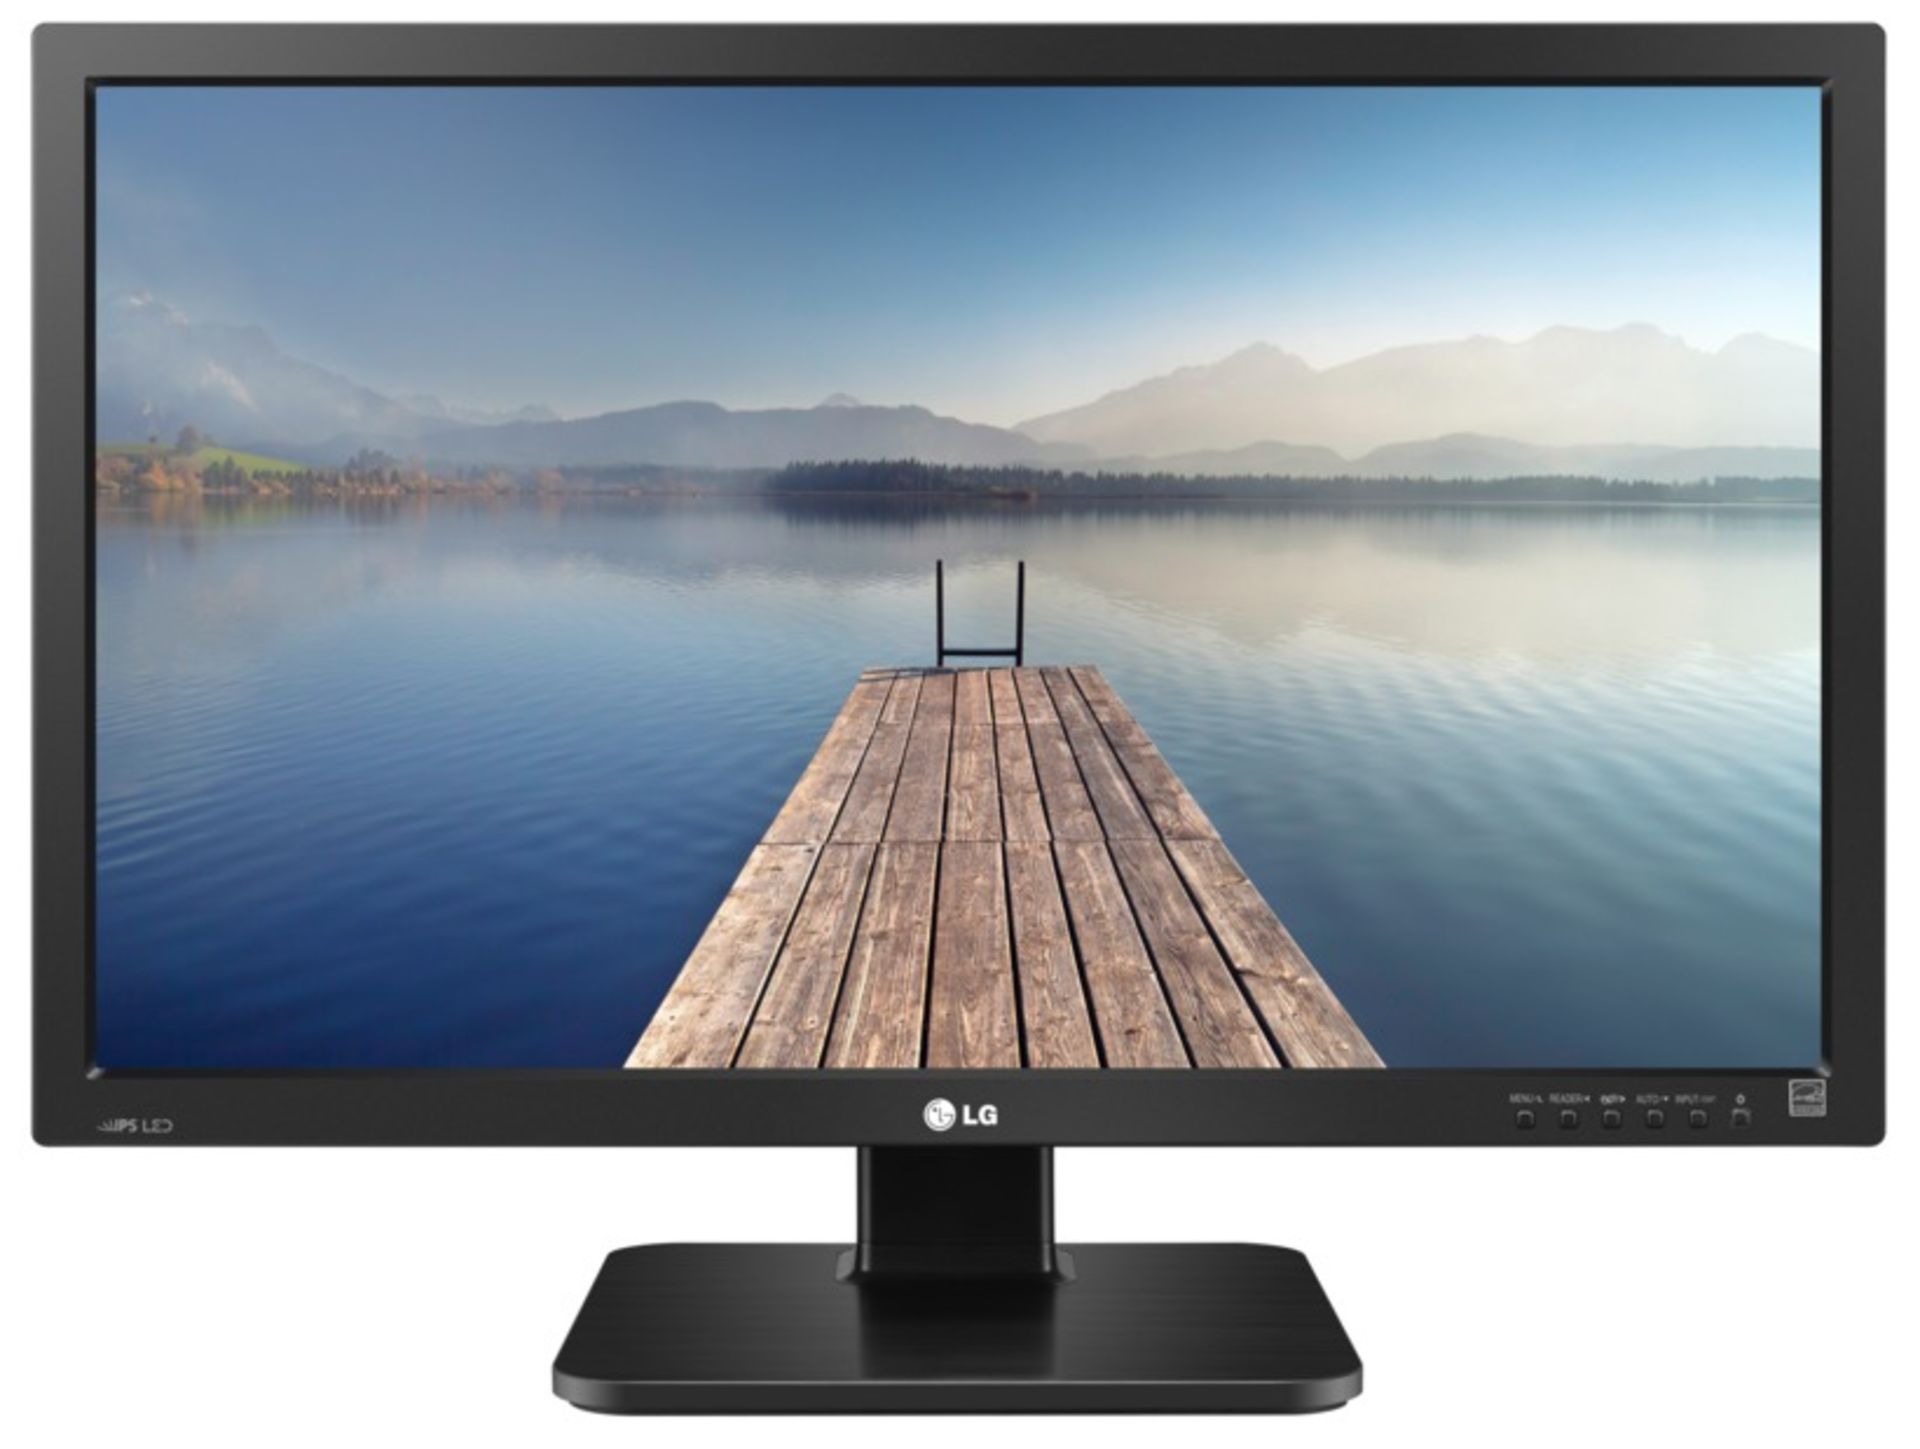 V Grade A LG 24 Inch FULL HD IPS LED MONITOR WITH SPEAKERS - D-SUB, DVI-D, HDMI, DISPLAY PORT - Image 2 of 2